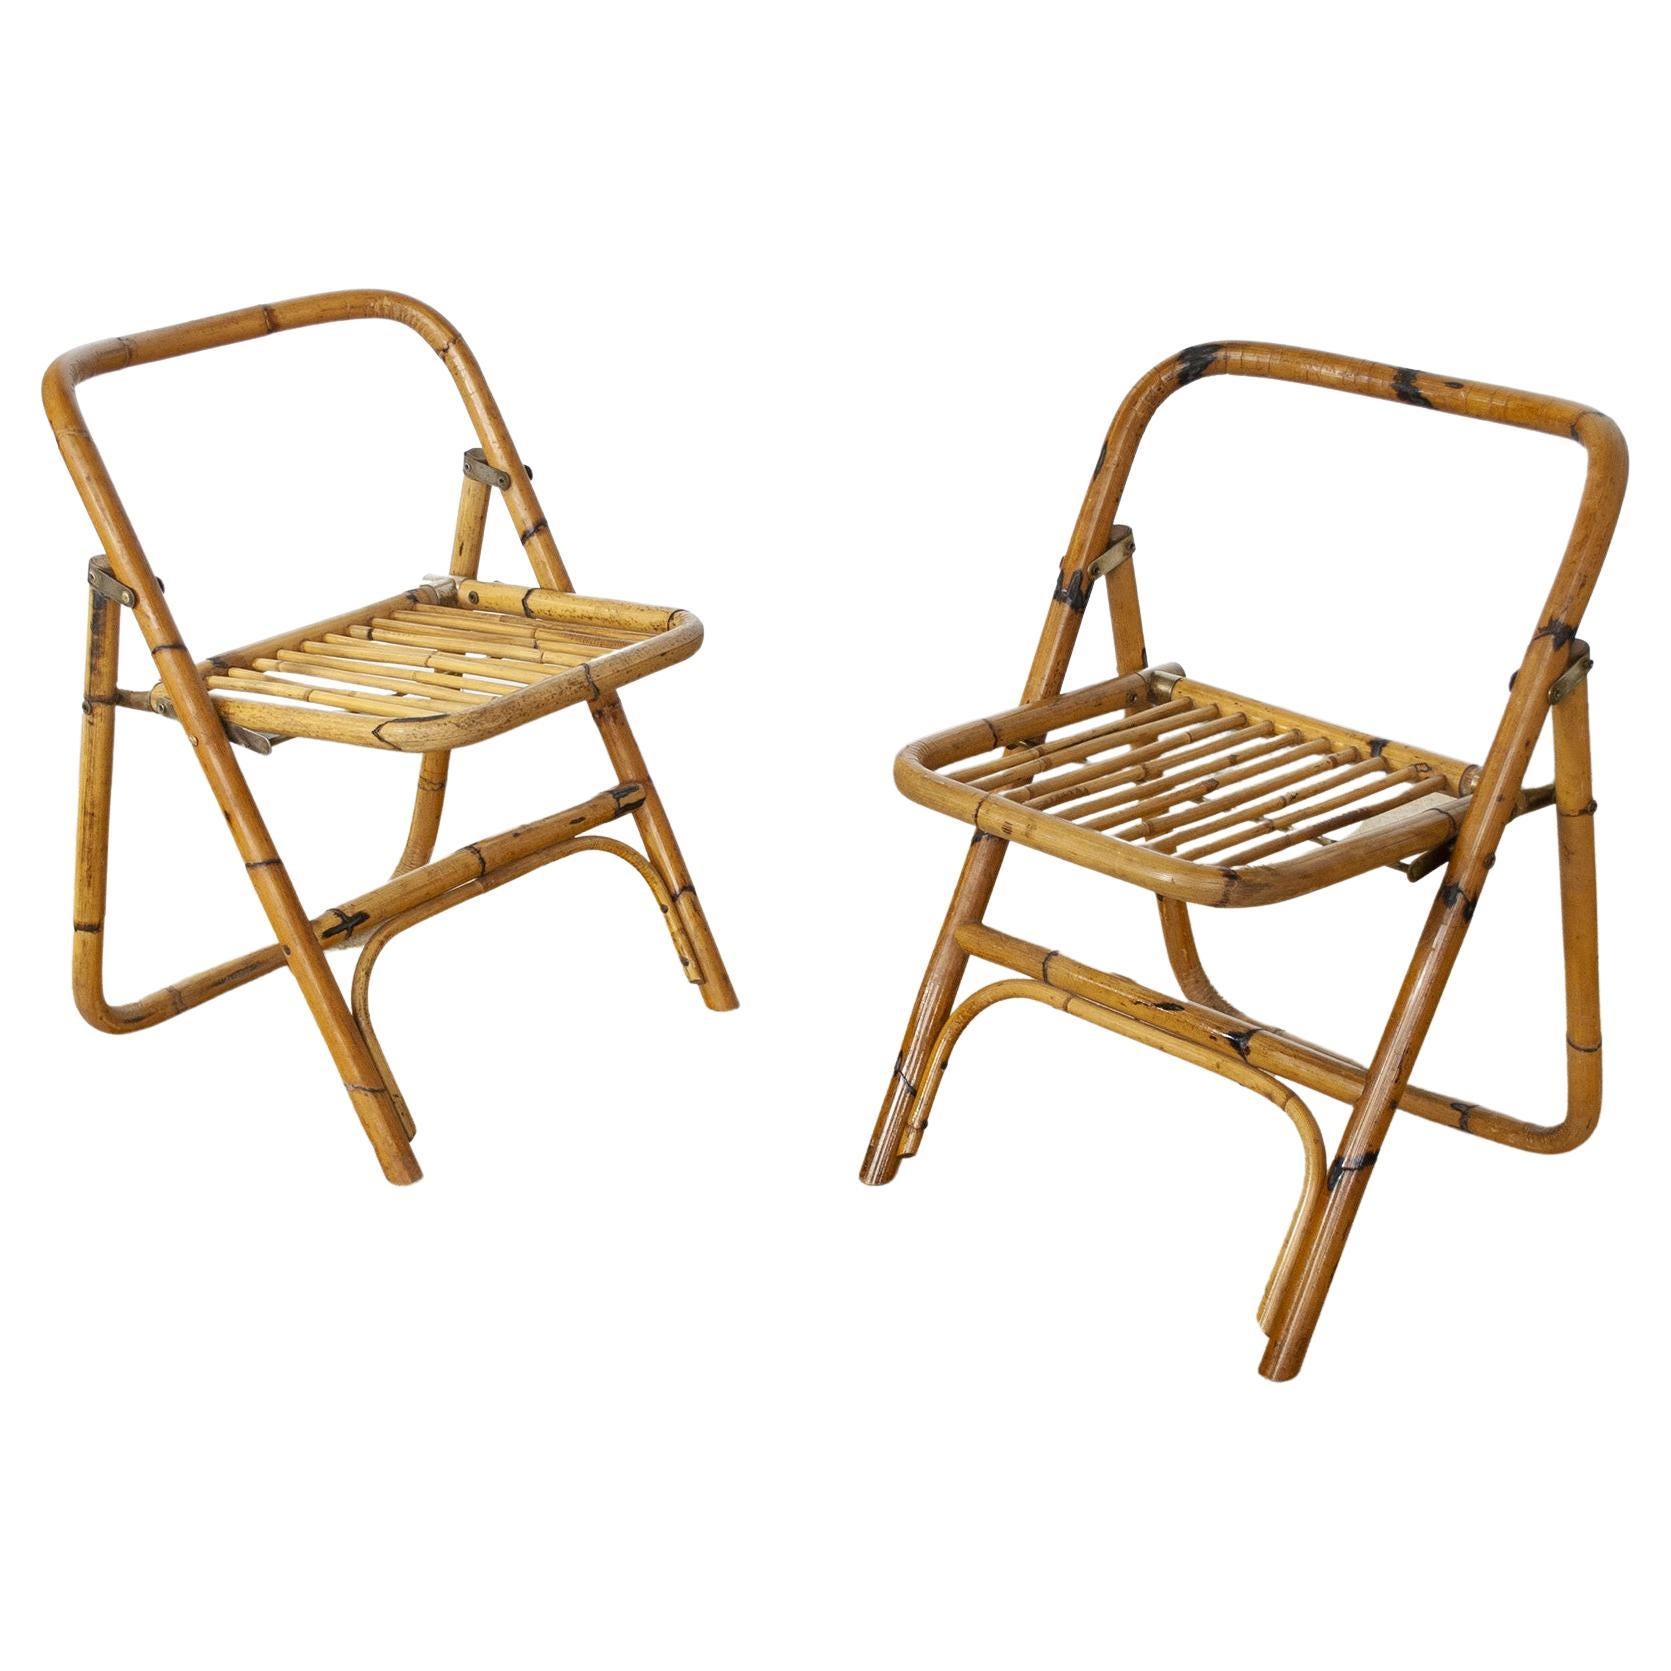 Dal Vera Italian Mid Century Pair of Bamboo Chairs For Sale